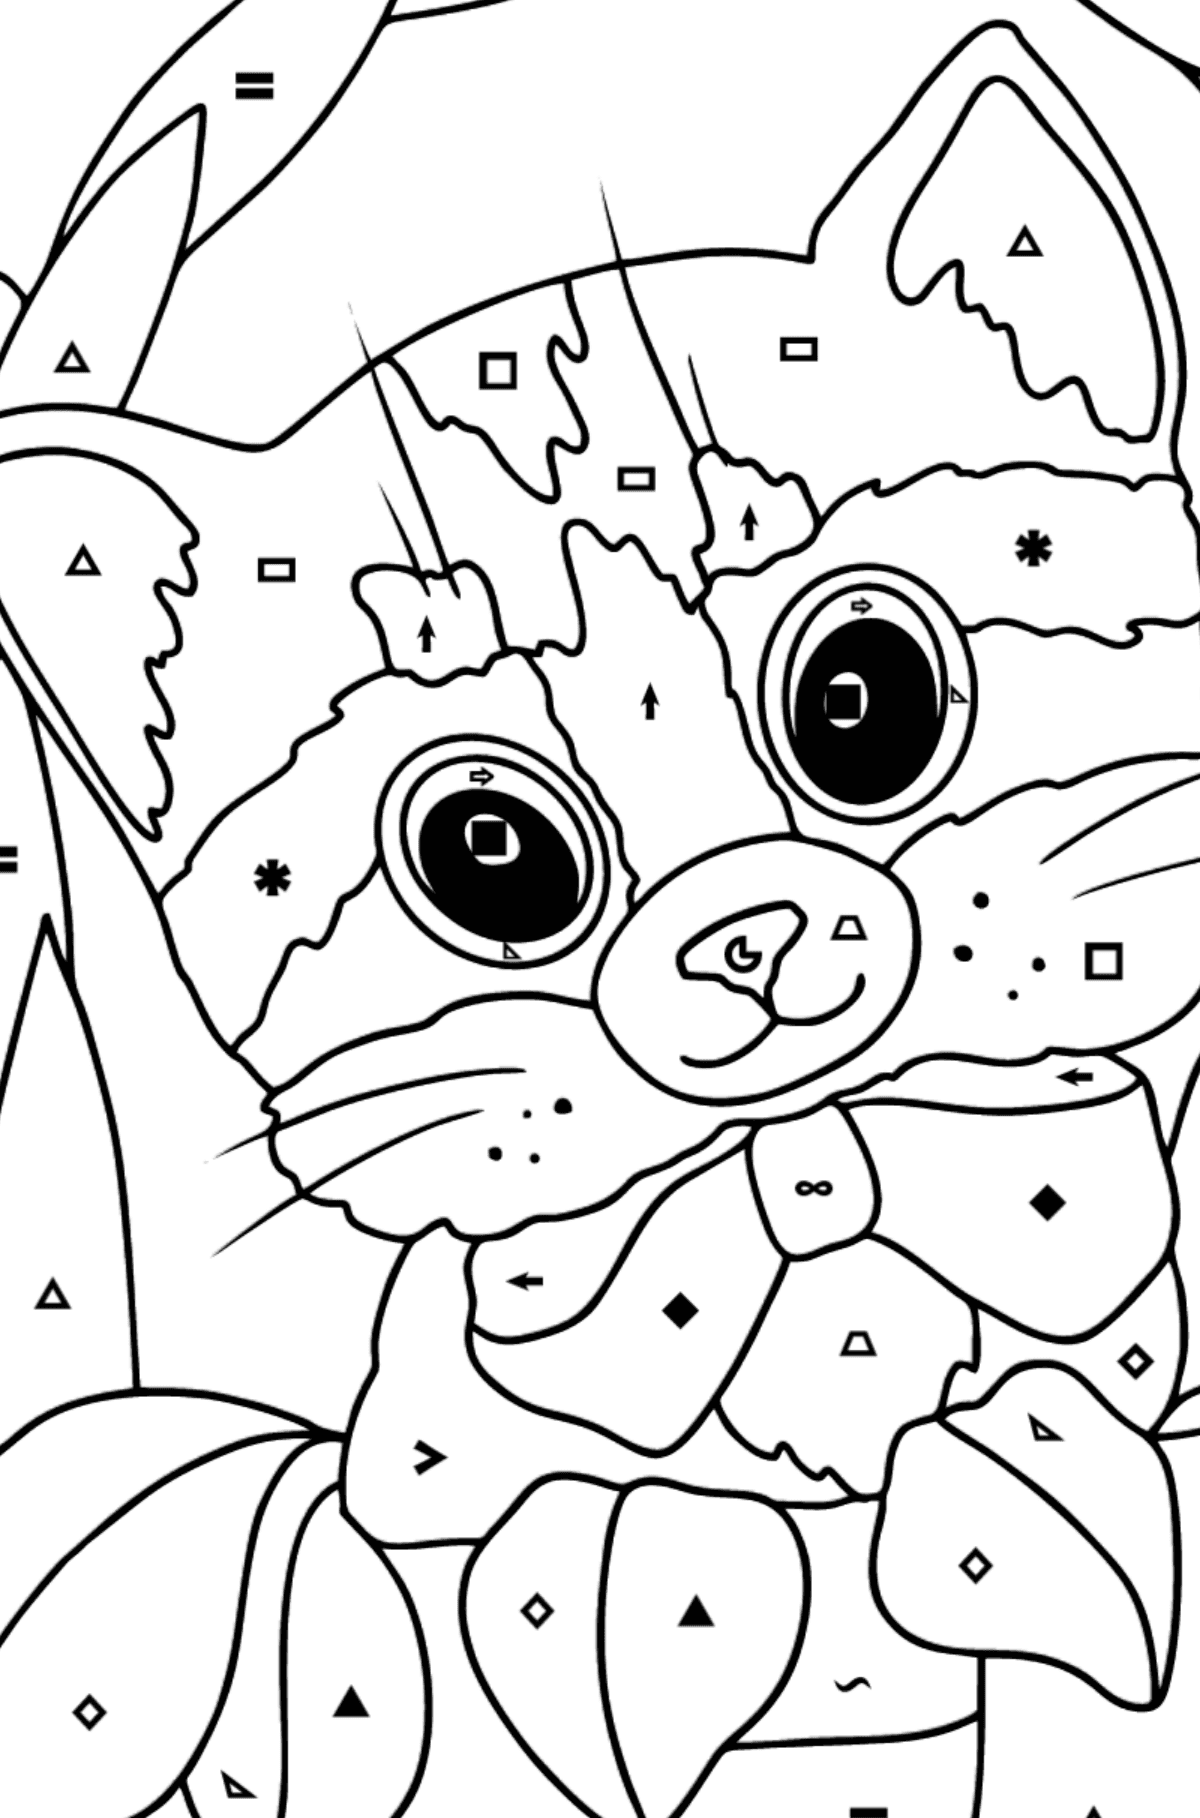 Kitten in a Basket coloring page - Coloring by Symbols and Geometric Shapes for Kids